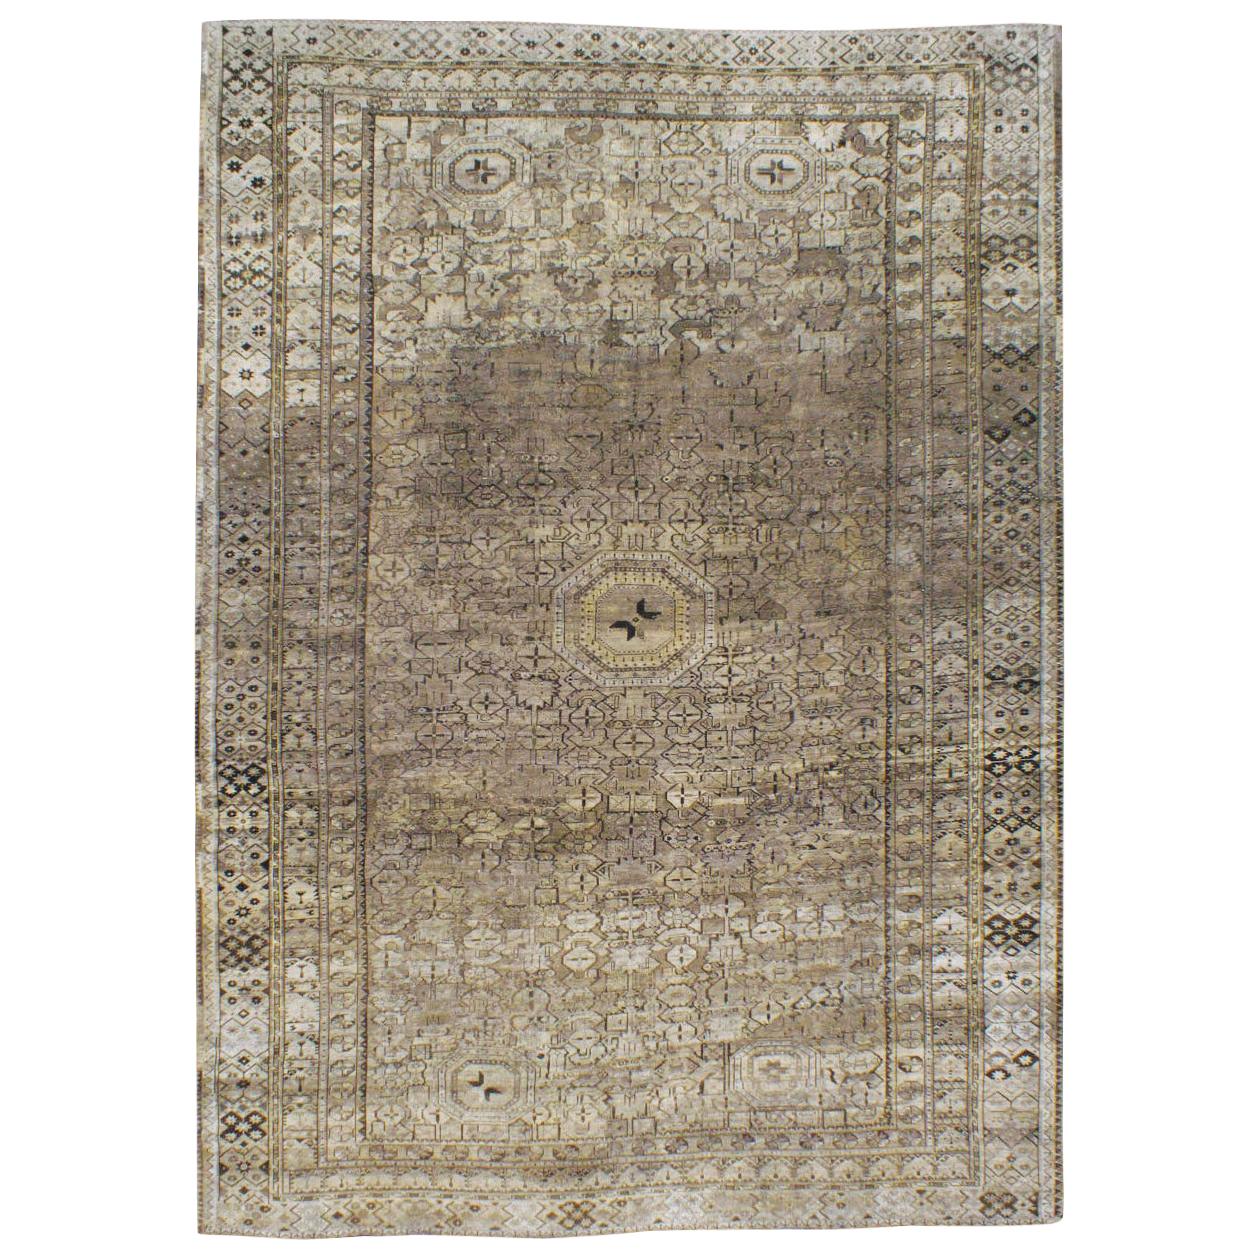 Early 20th Century Beshir Large Room Size Tribal Rug in Neutral Earth Tones For Sale